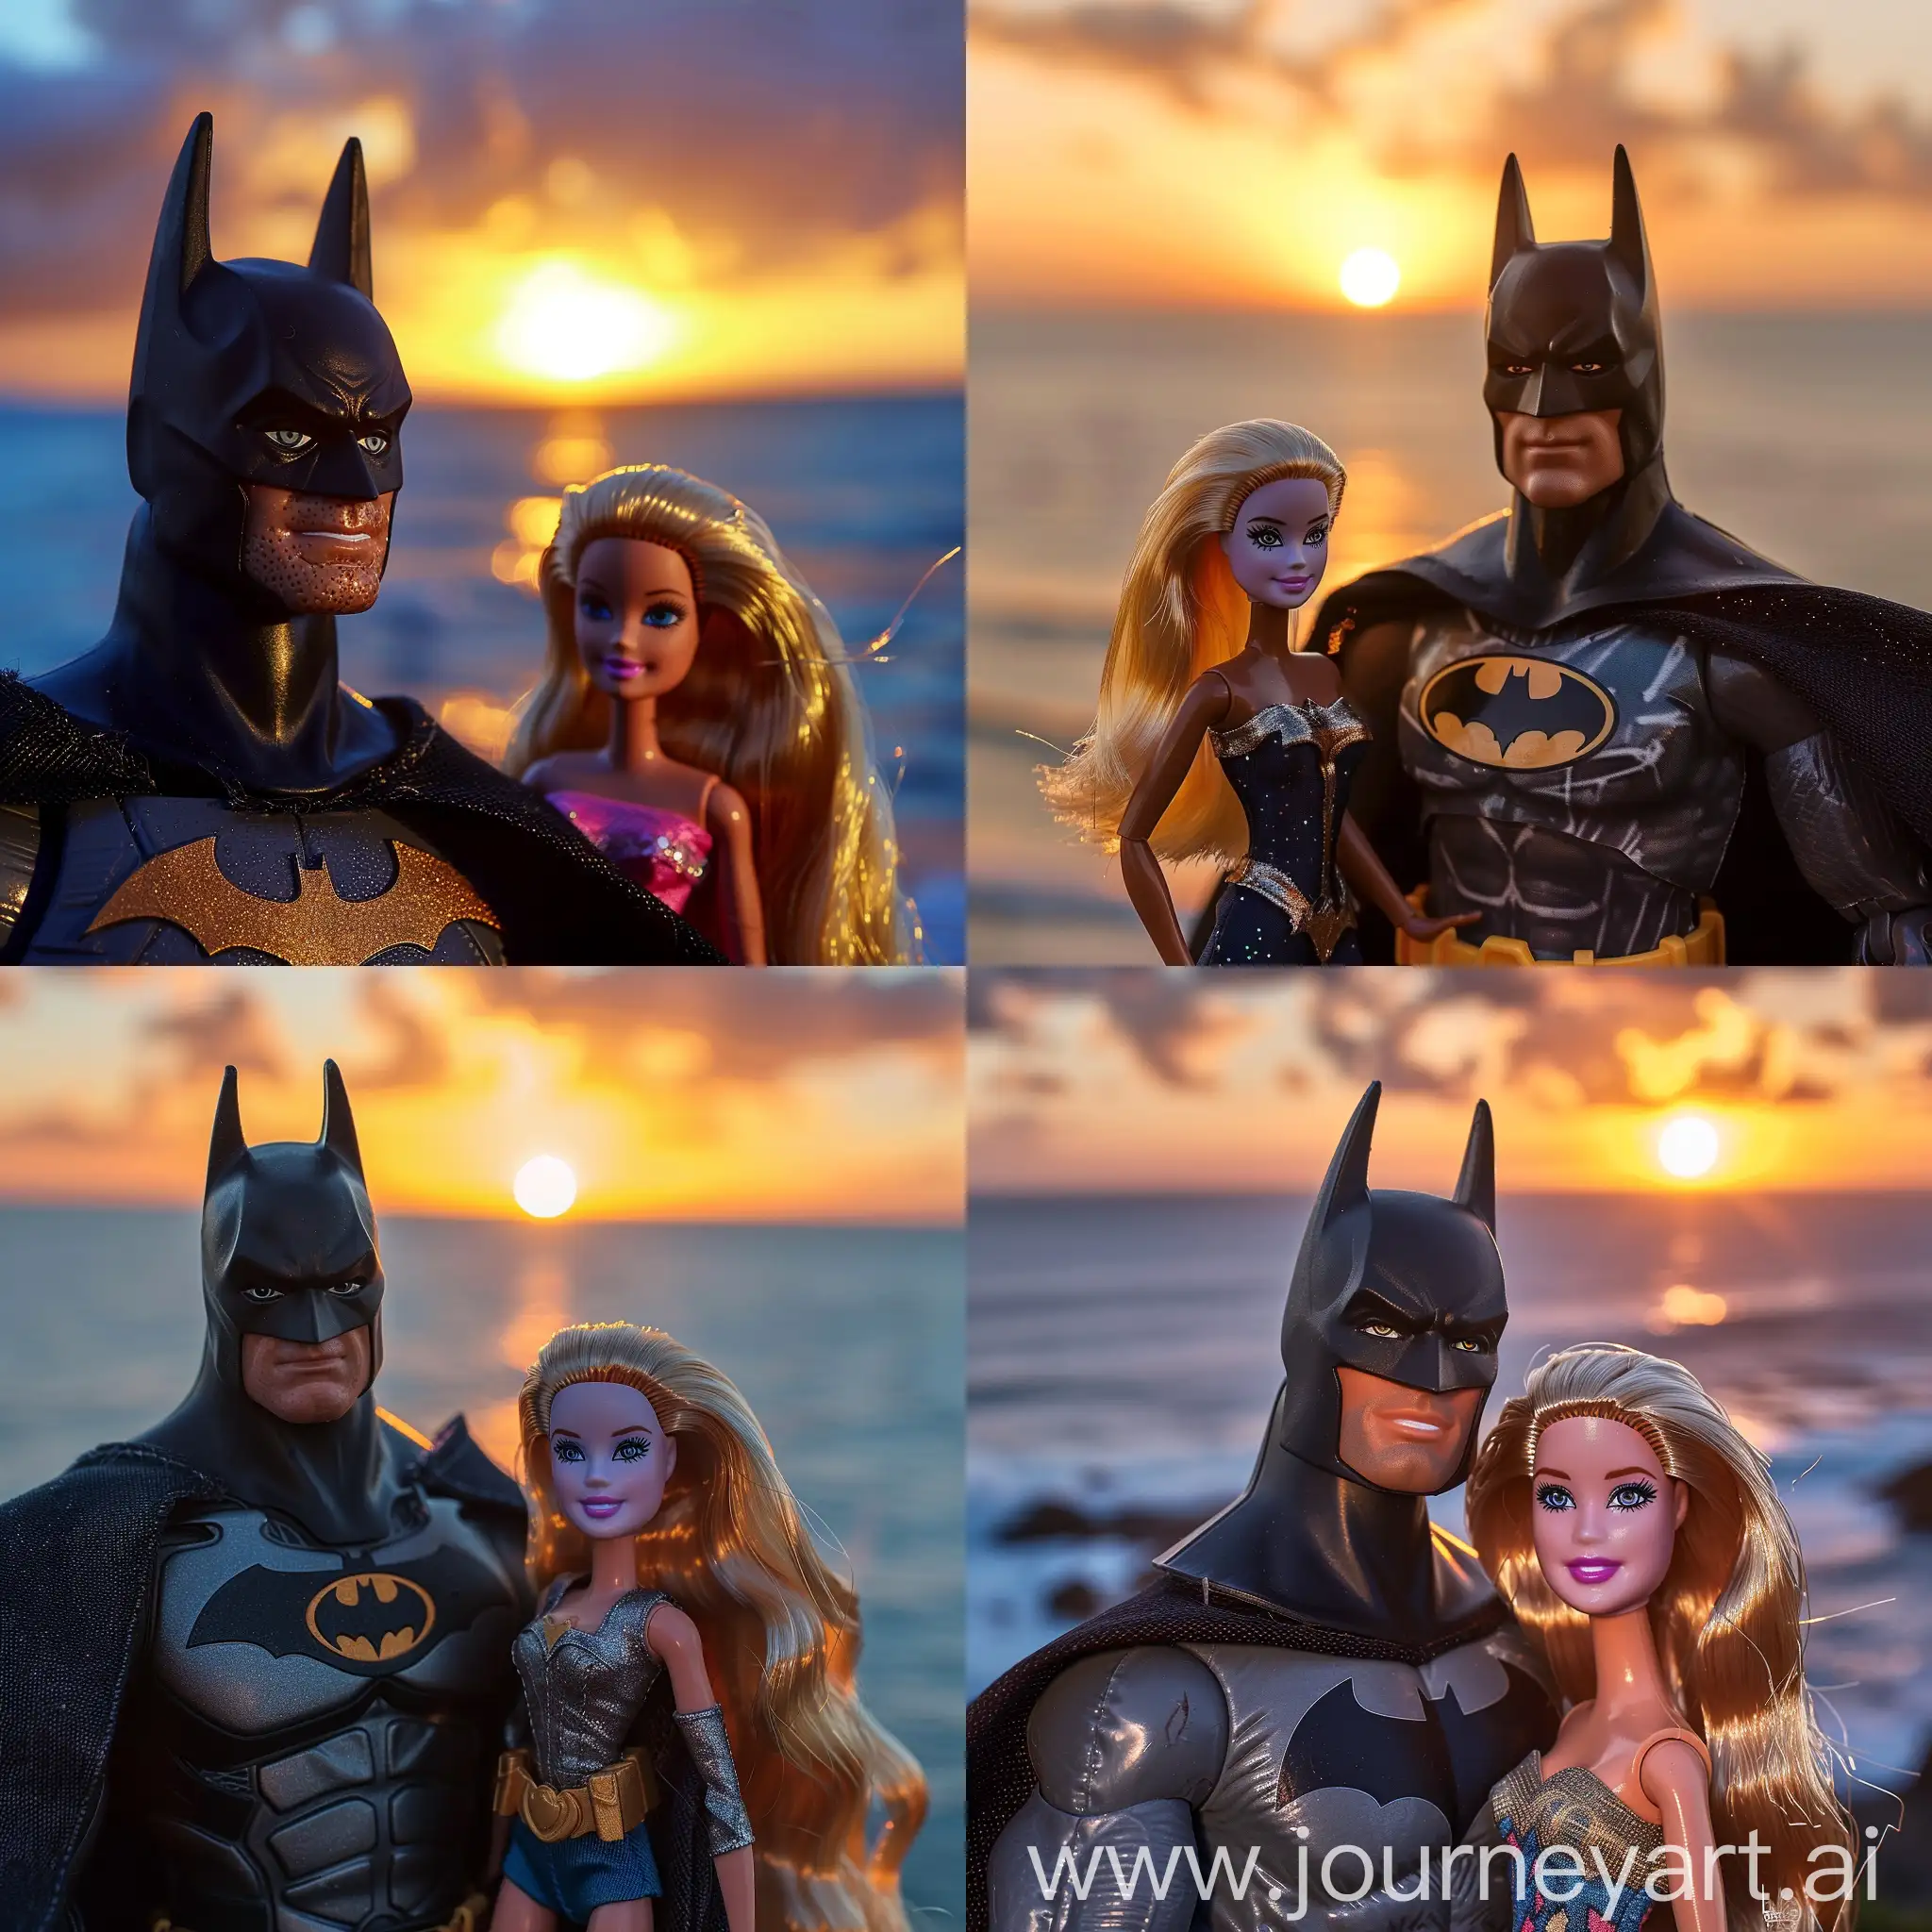  batman with barbie on the background of the sunset near the sea